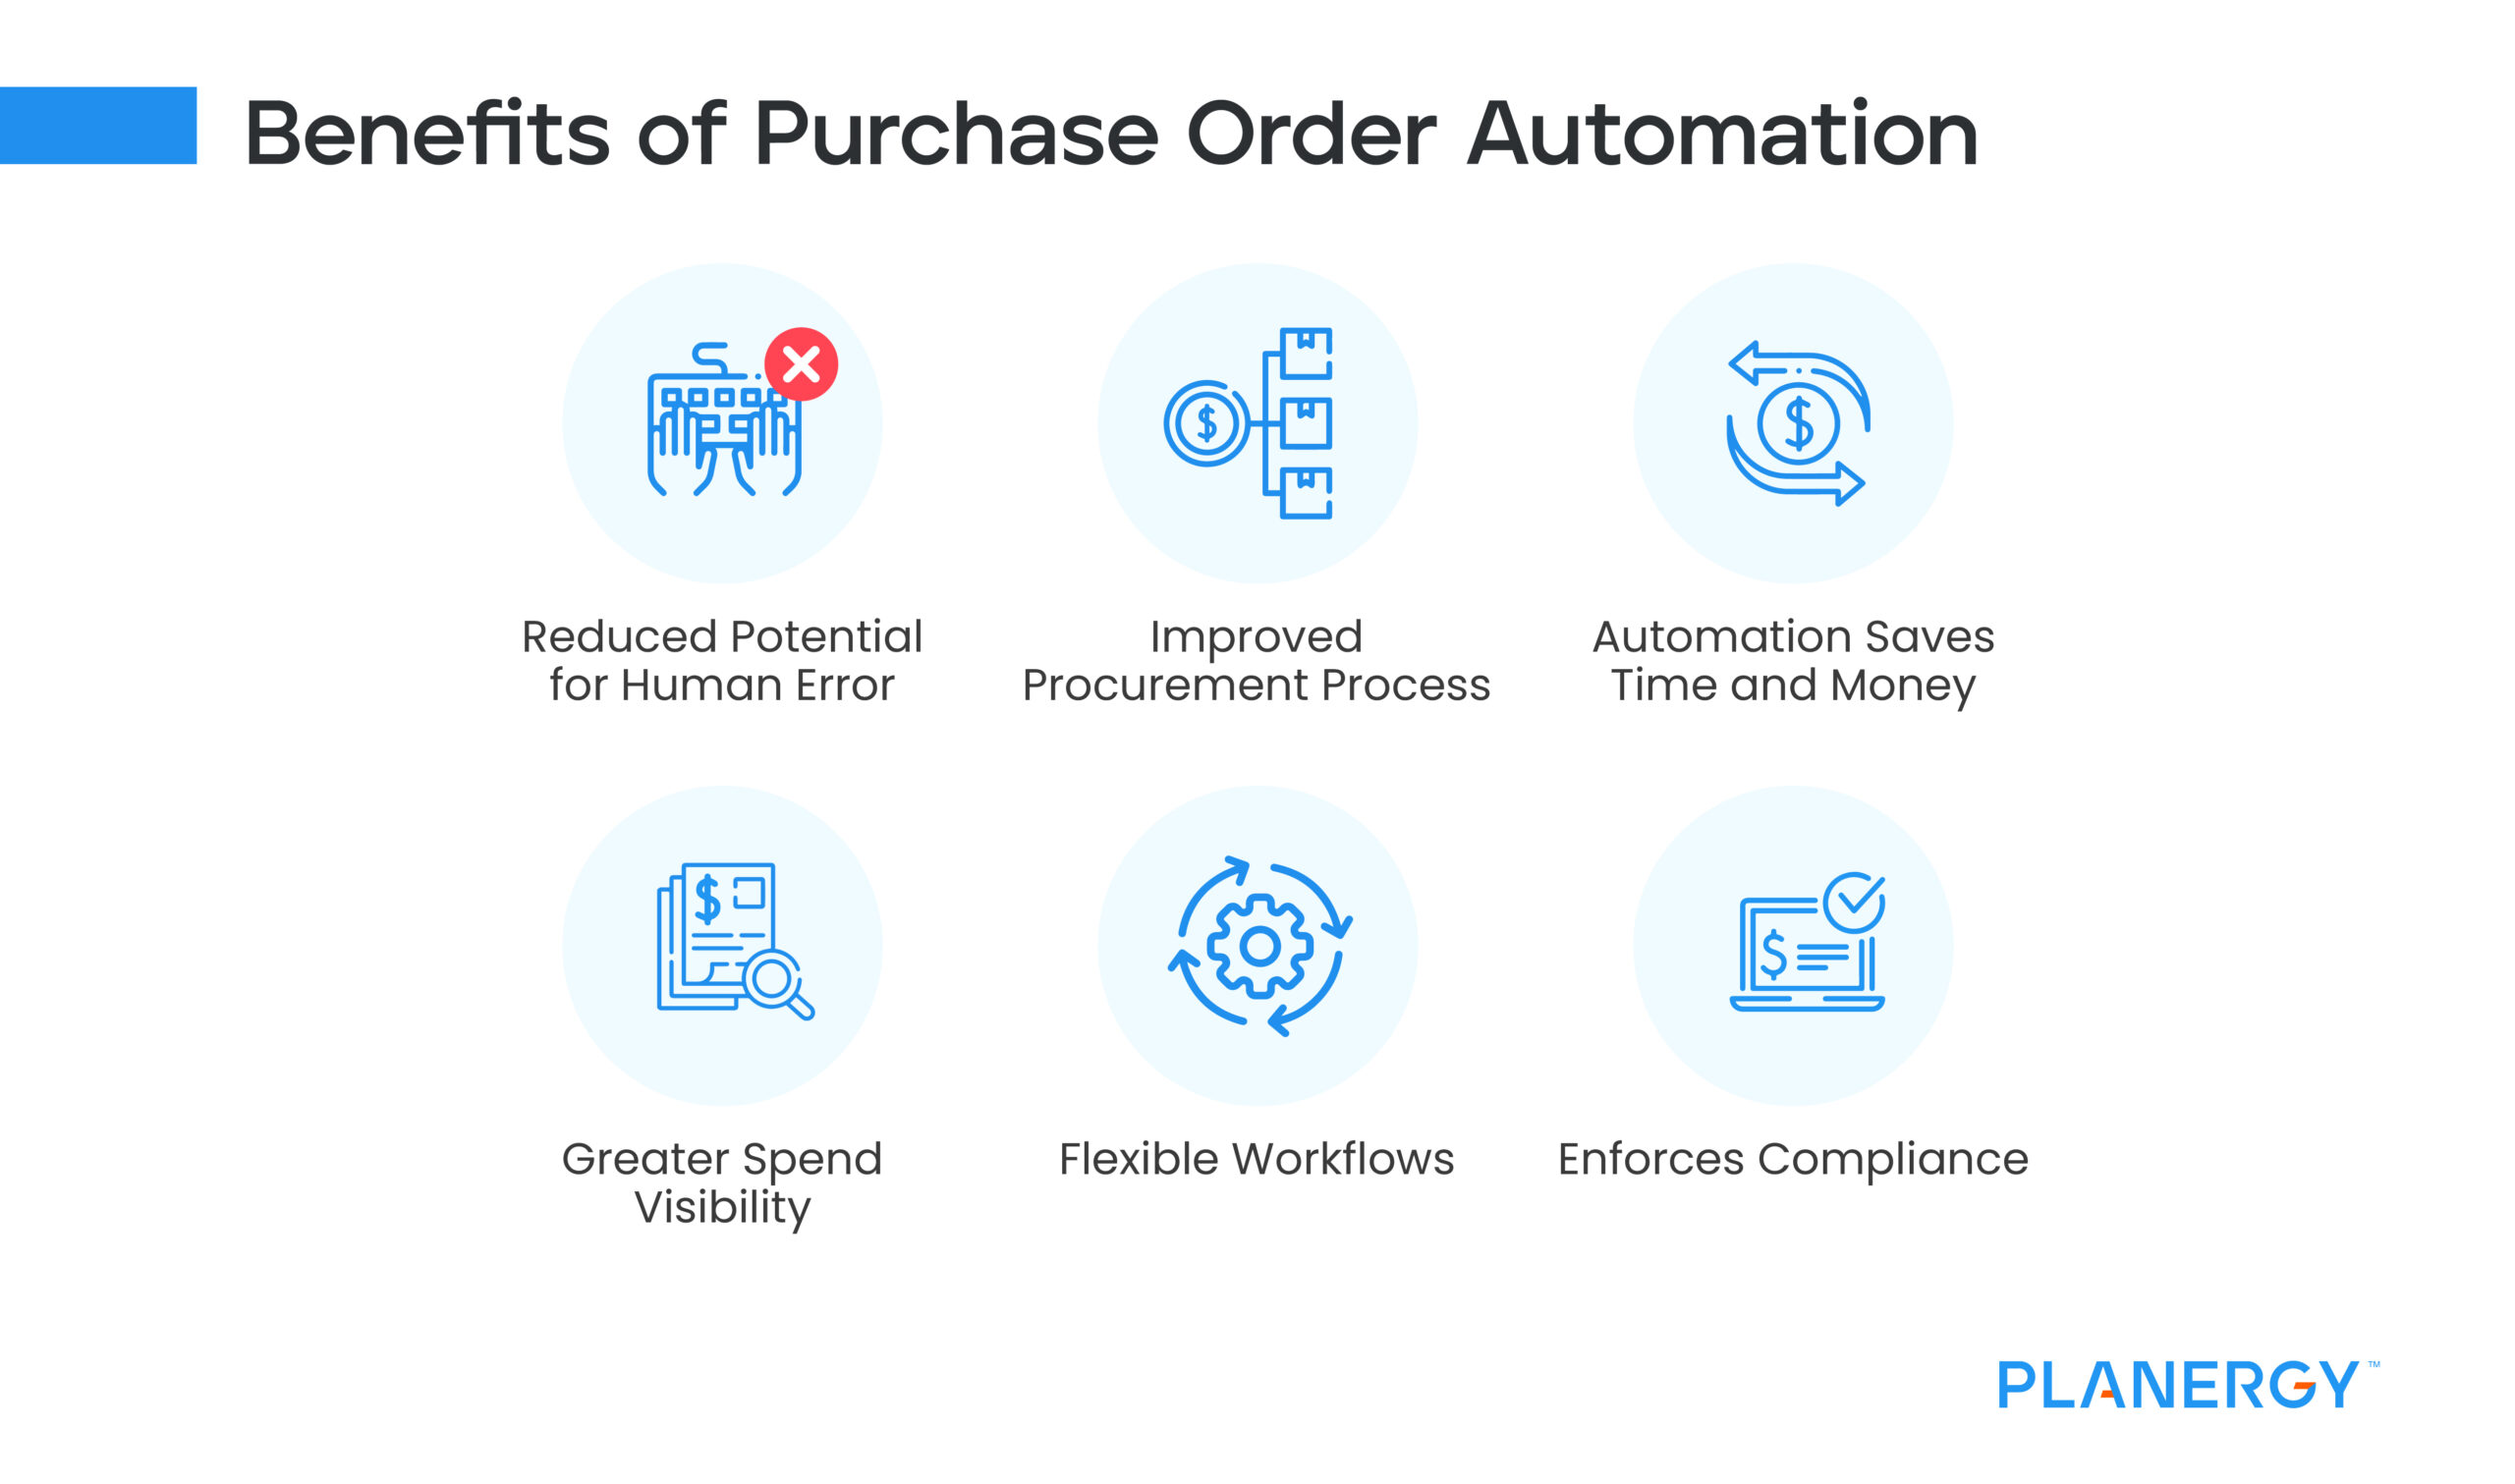 Benefits of Purchase Order Automation